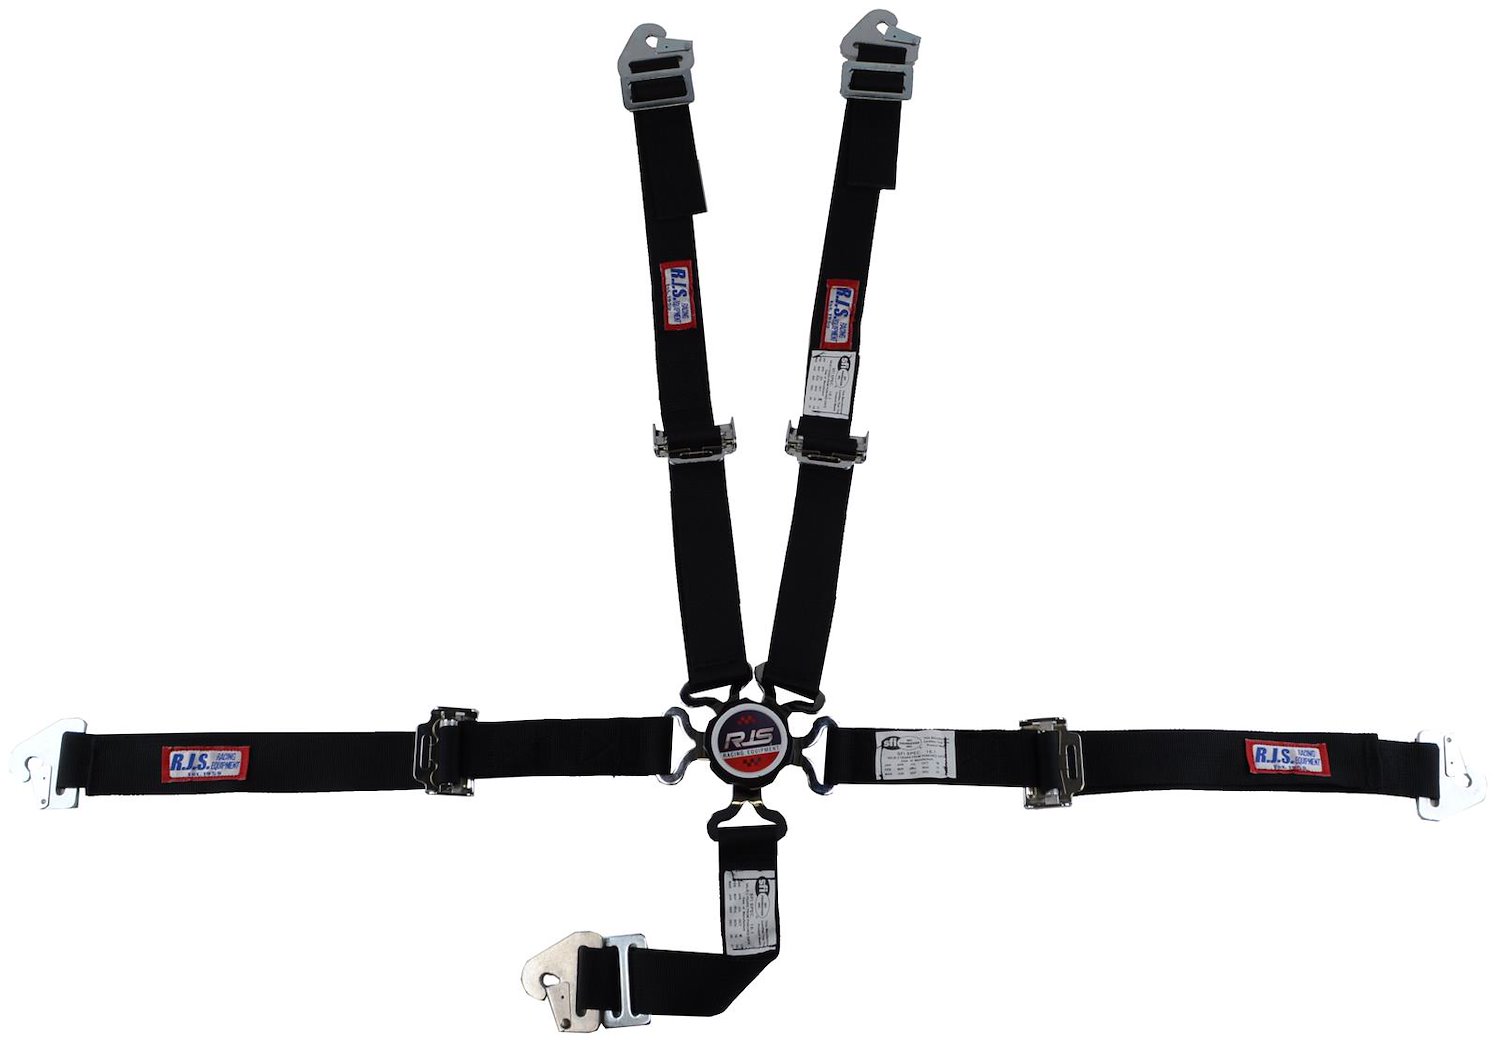 SFI 16.1 CAM-LOCK HARNESS 2 PULL UP Lap Belt 2 Shoulder Harness Individual ROLL BAR Mount 2 DOUBLE Sub ALL WRAP ENDS RED